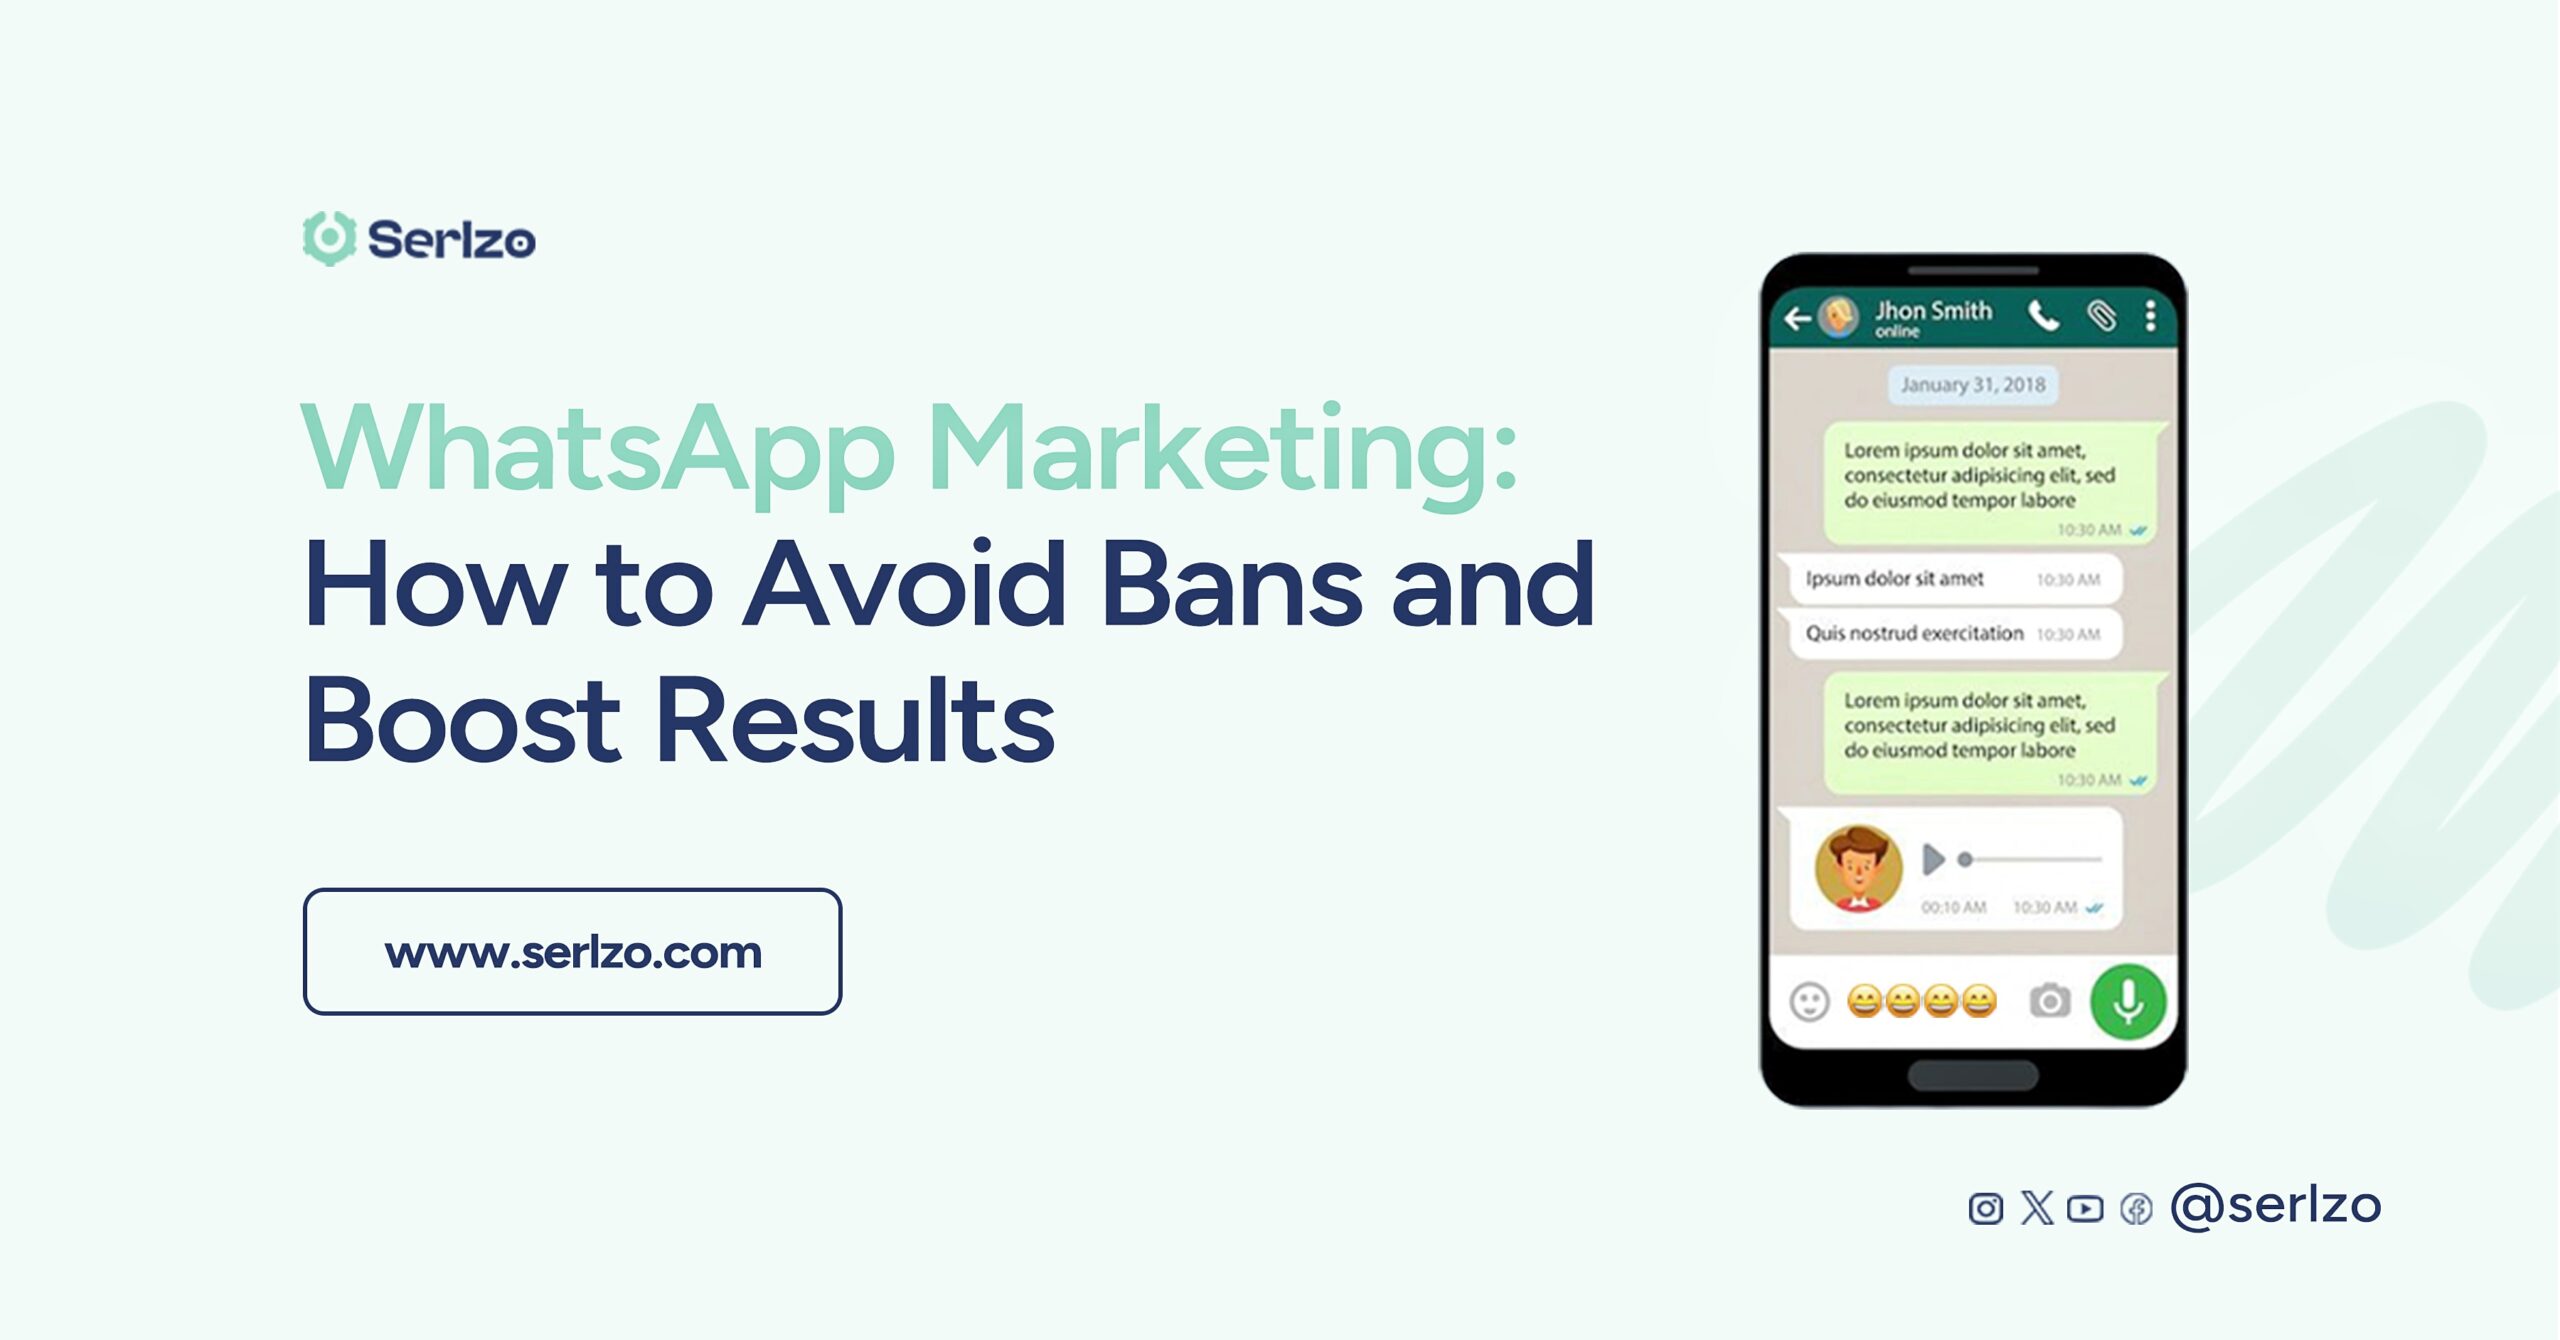 WhatsApp Marketing: How to Avoid Bans and Boost Results